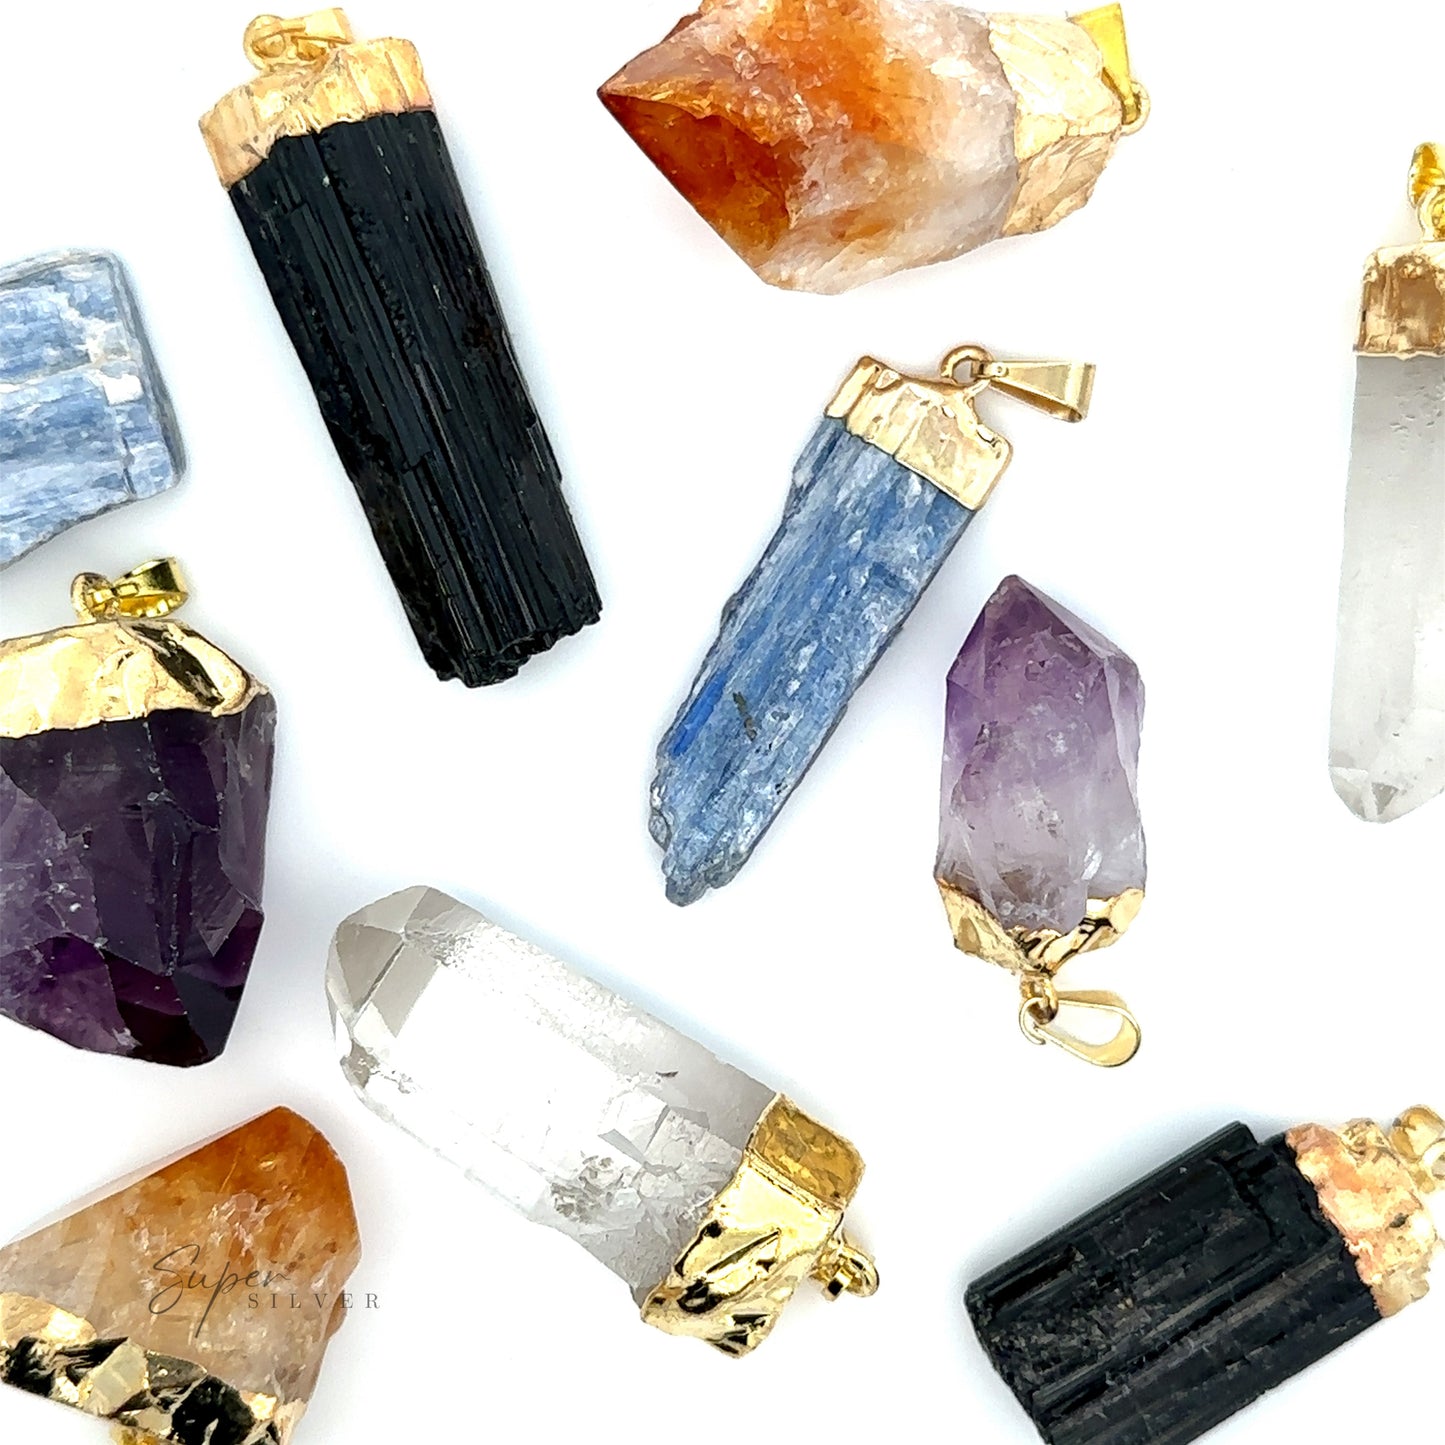 A collection of Raw Crystal Pendant With Gold Cap featuring raw crystals, including amethyst, citrine, black tourmaline, and quartz, all adorned with gold-plated caps and attachment loops.